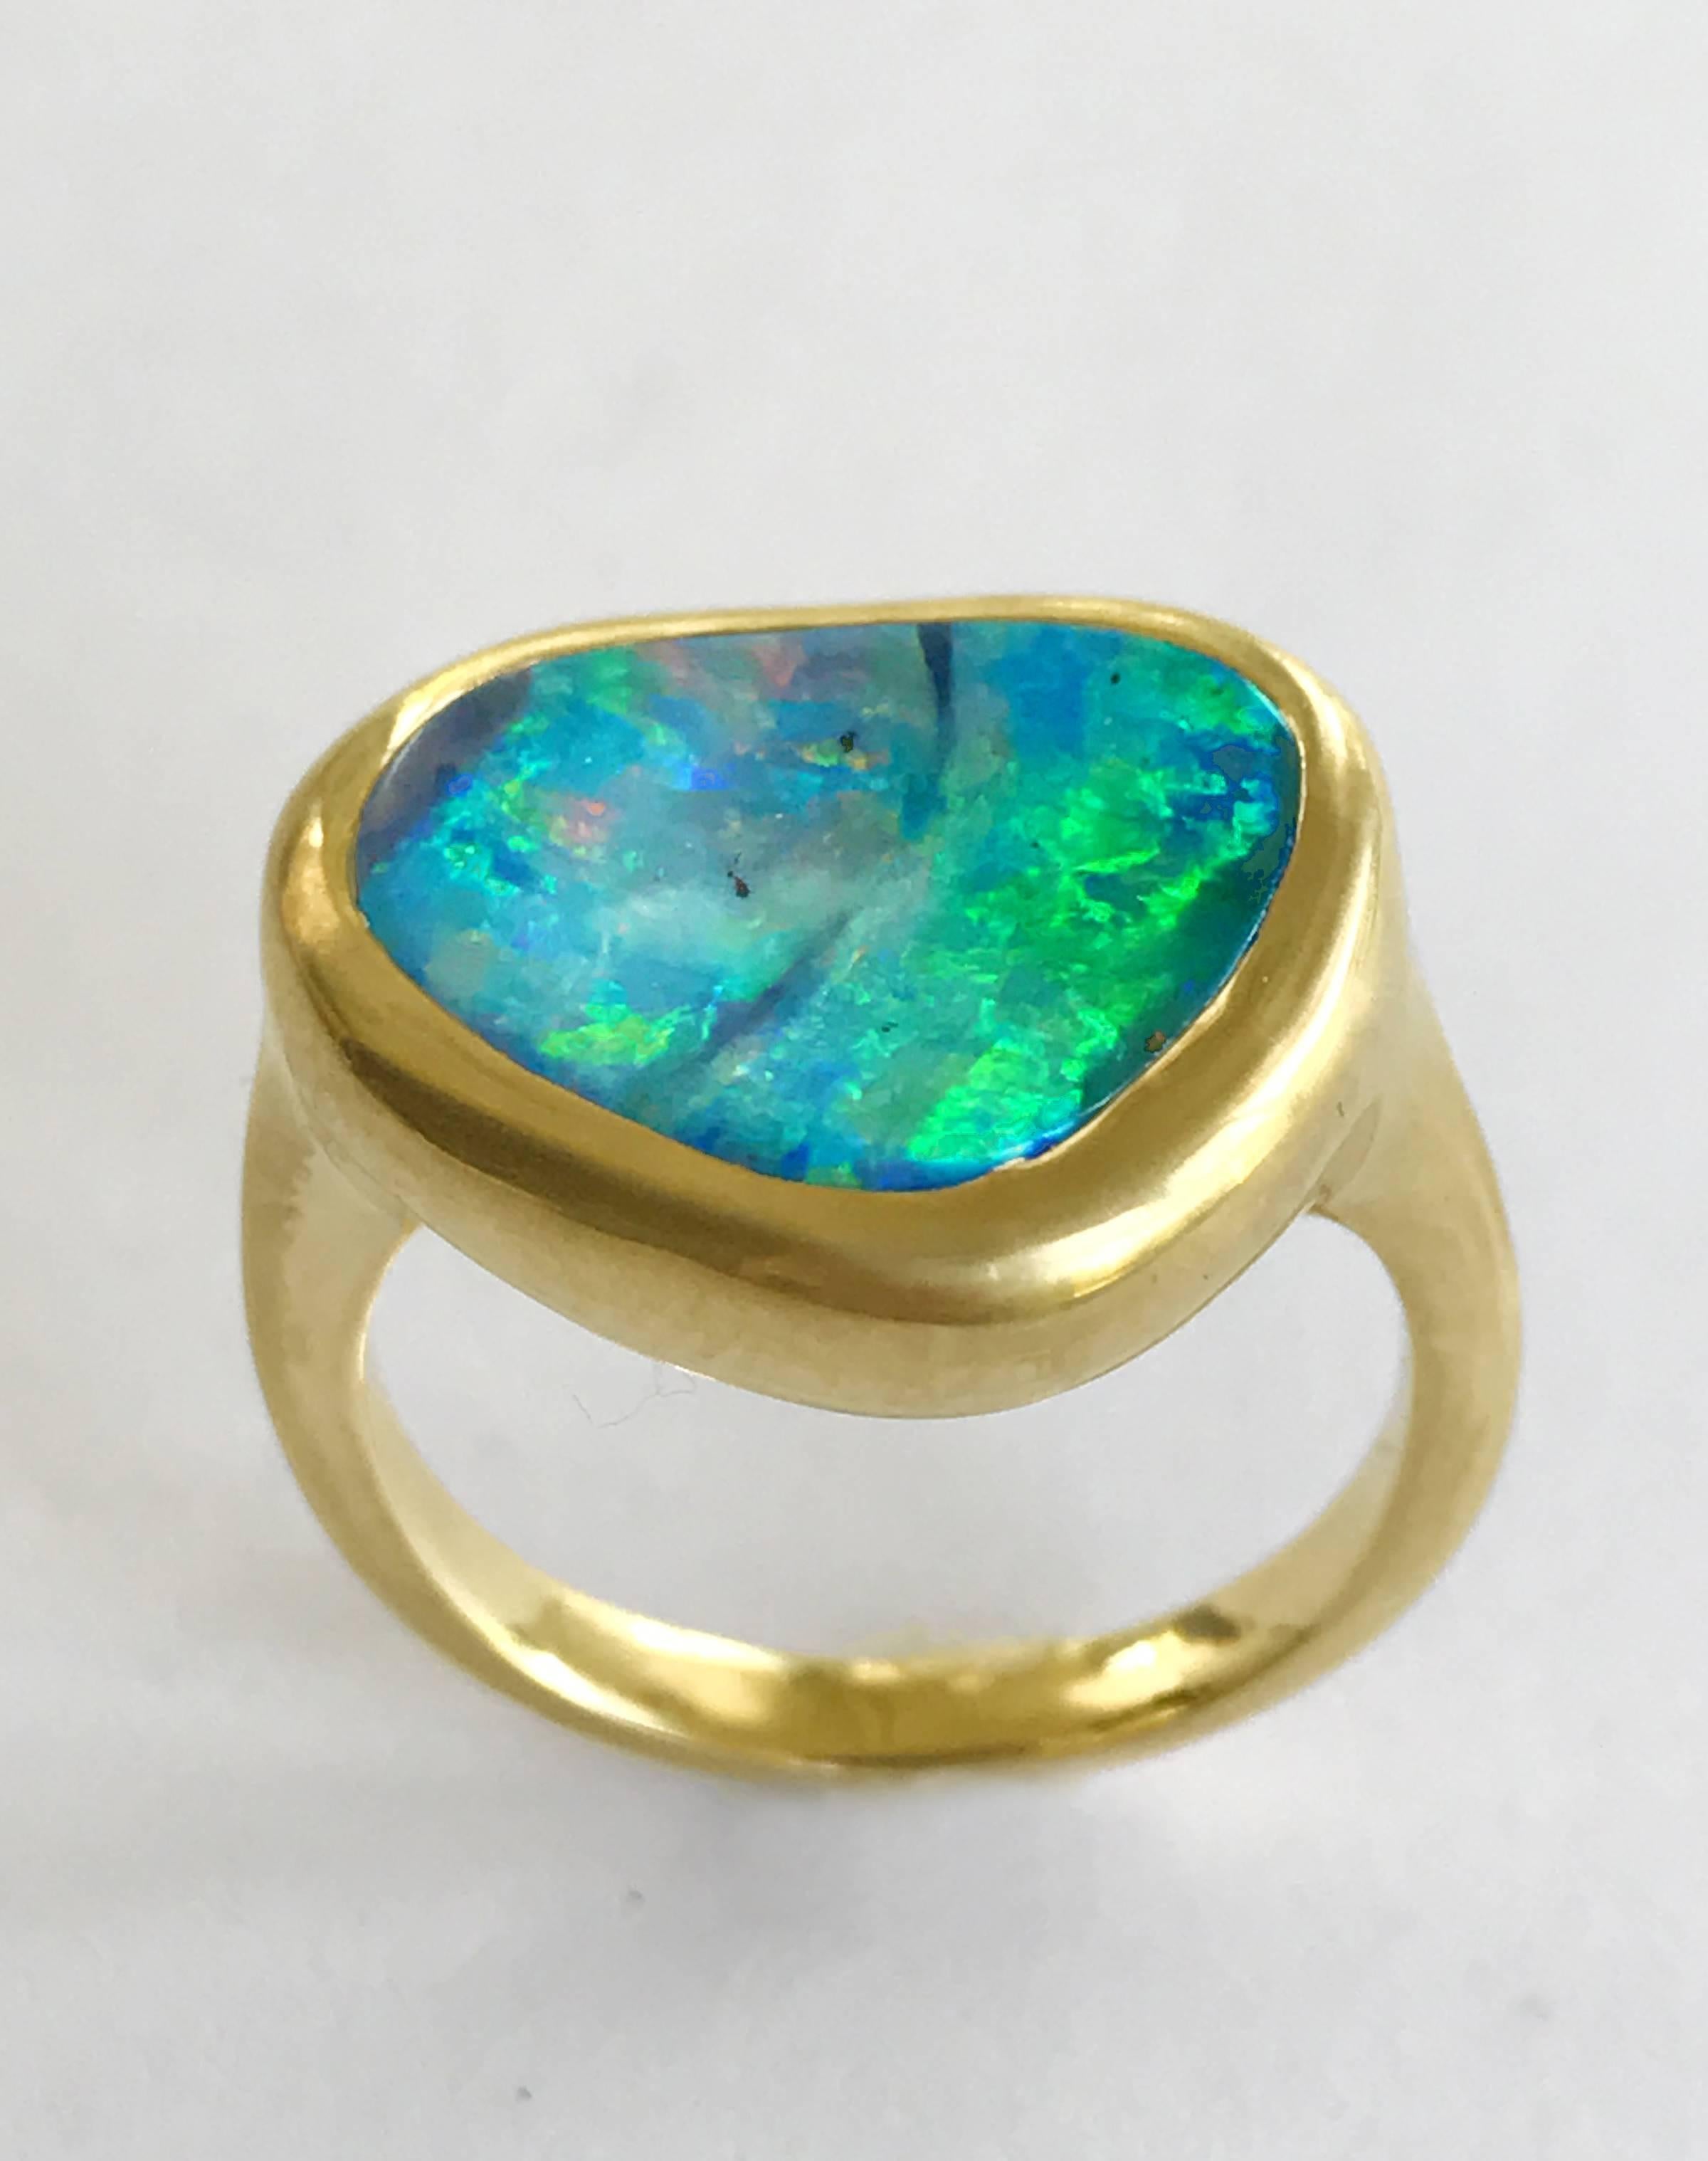 Dalben design One of a kind 18k yellow gold semi lucid finishing ring with a 4,5 carat bezel-set wonderful Australian Boulder Opal .  
The stone rainbow colors continuosly change with the different light from deep blue , to azure green , to deep